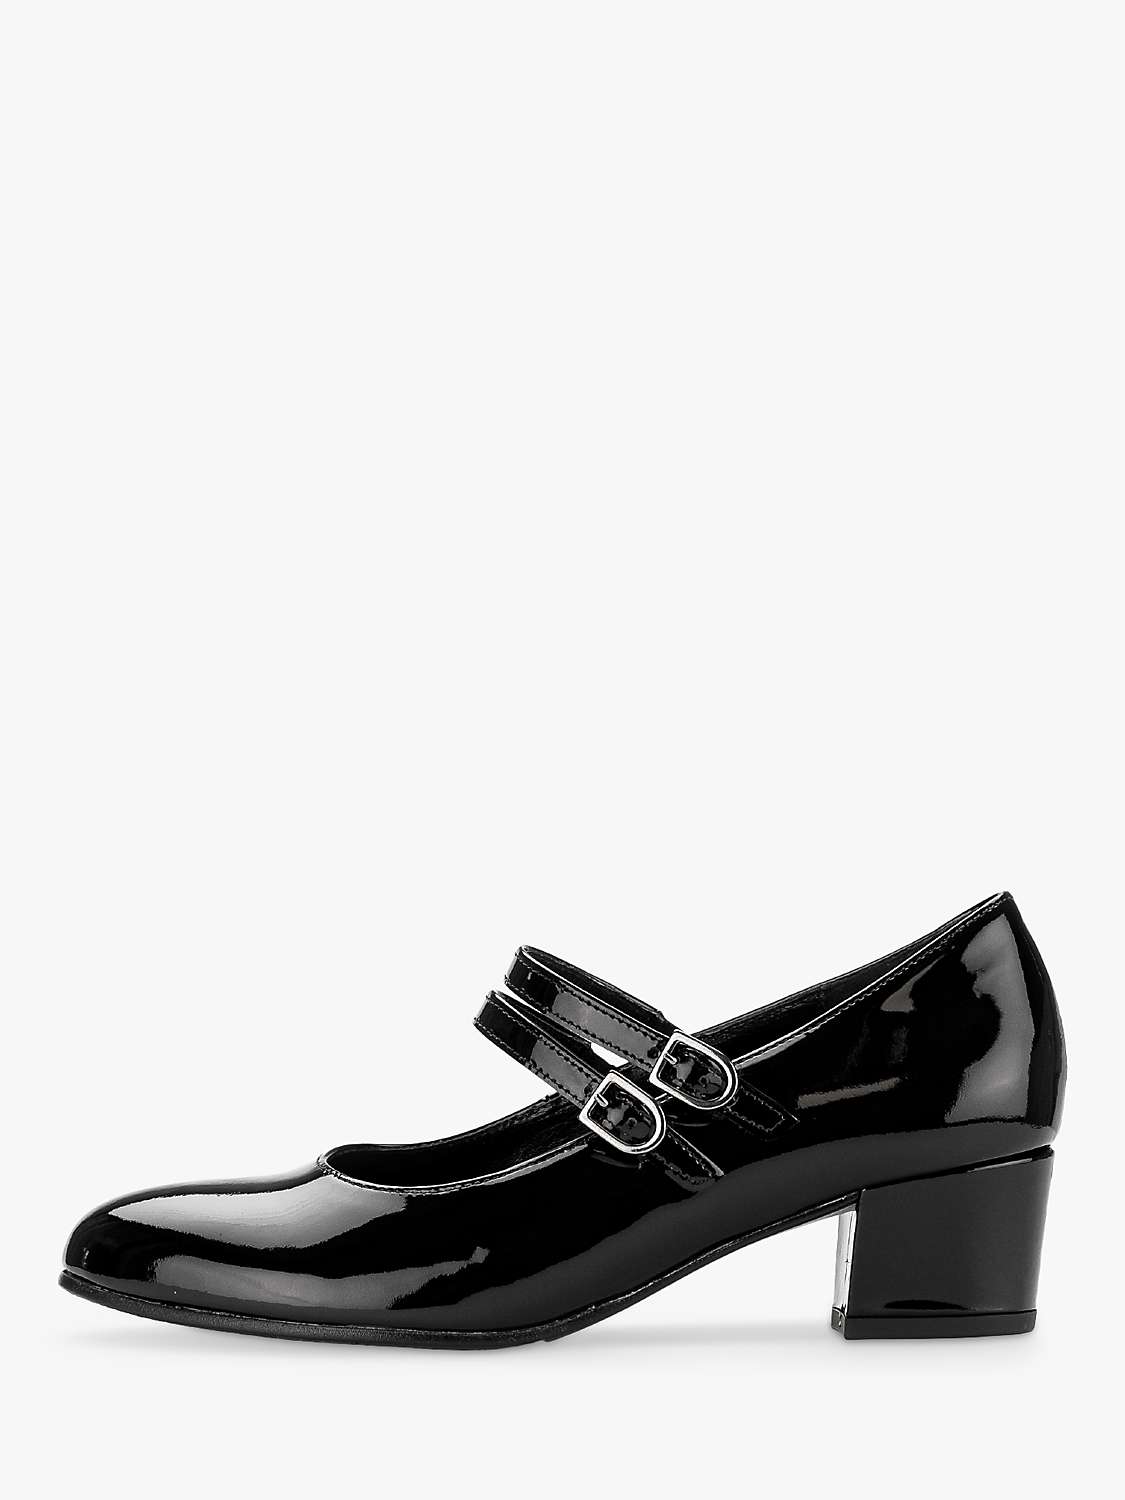 Buy Gabor Belva Wide Fit Patent Leather Mary Jane Shoes, Black Online at johnlewis.com